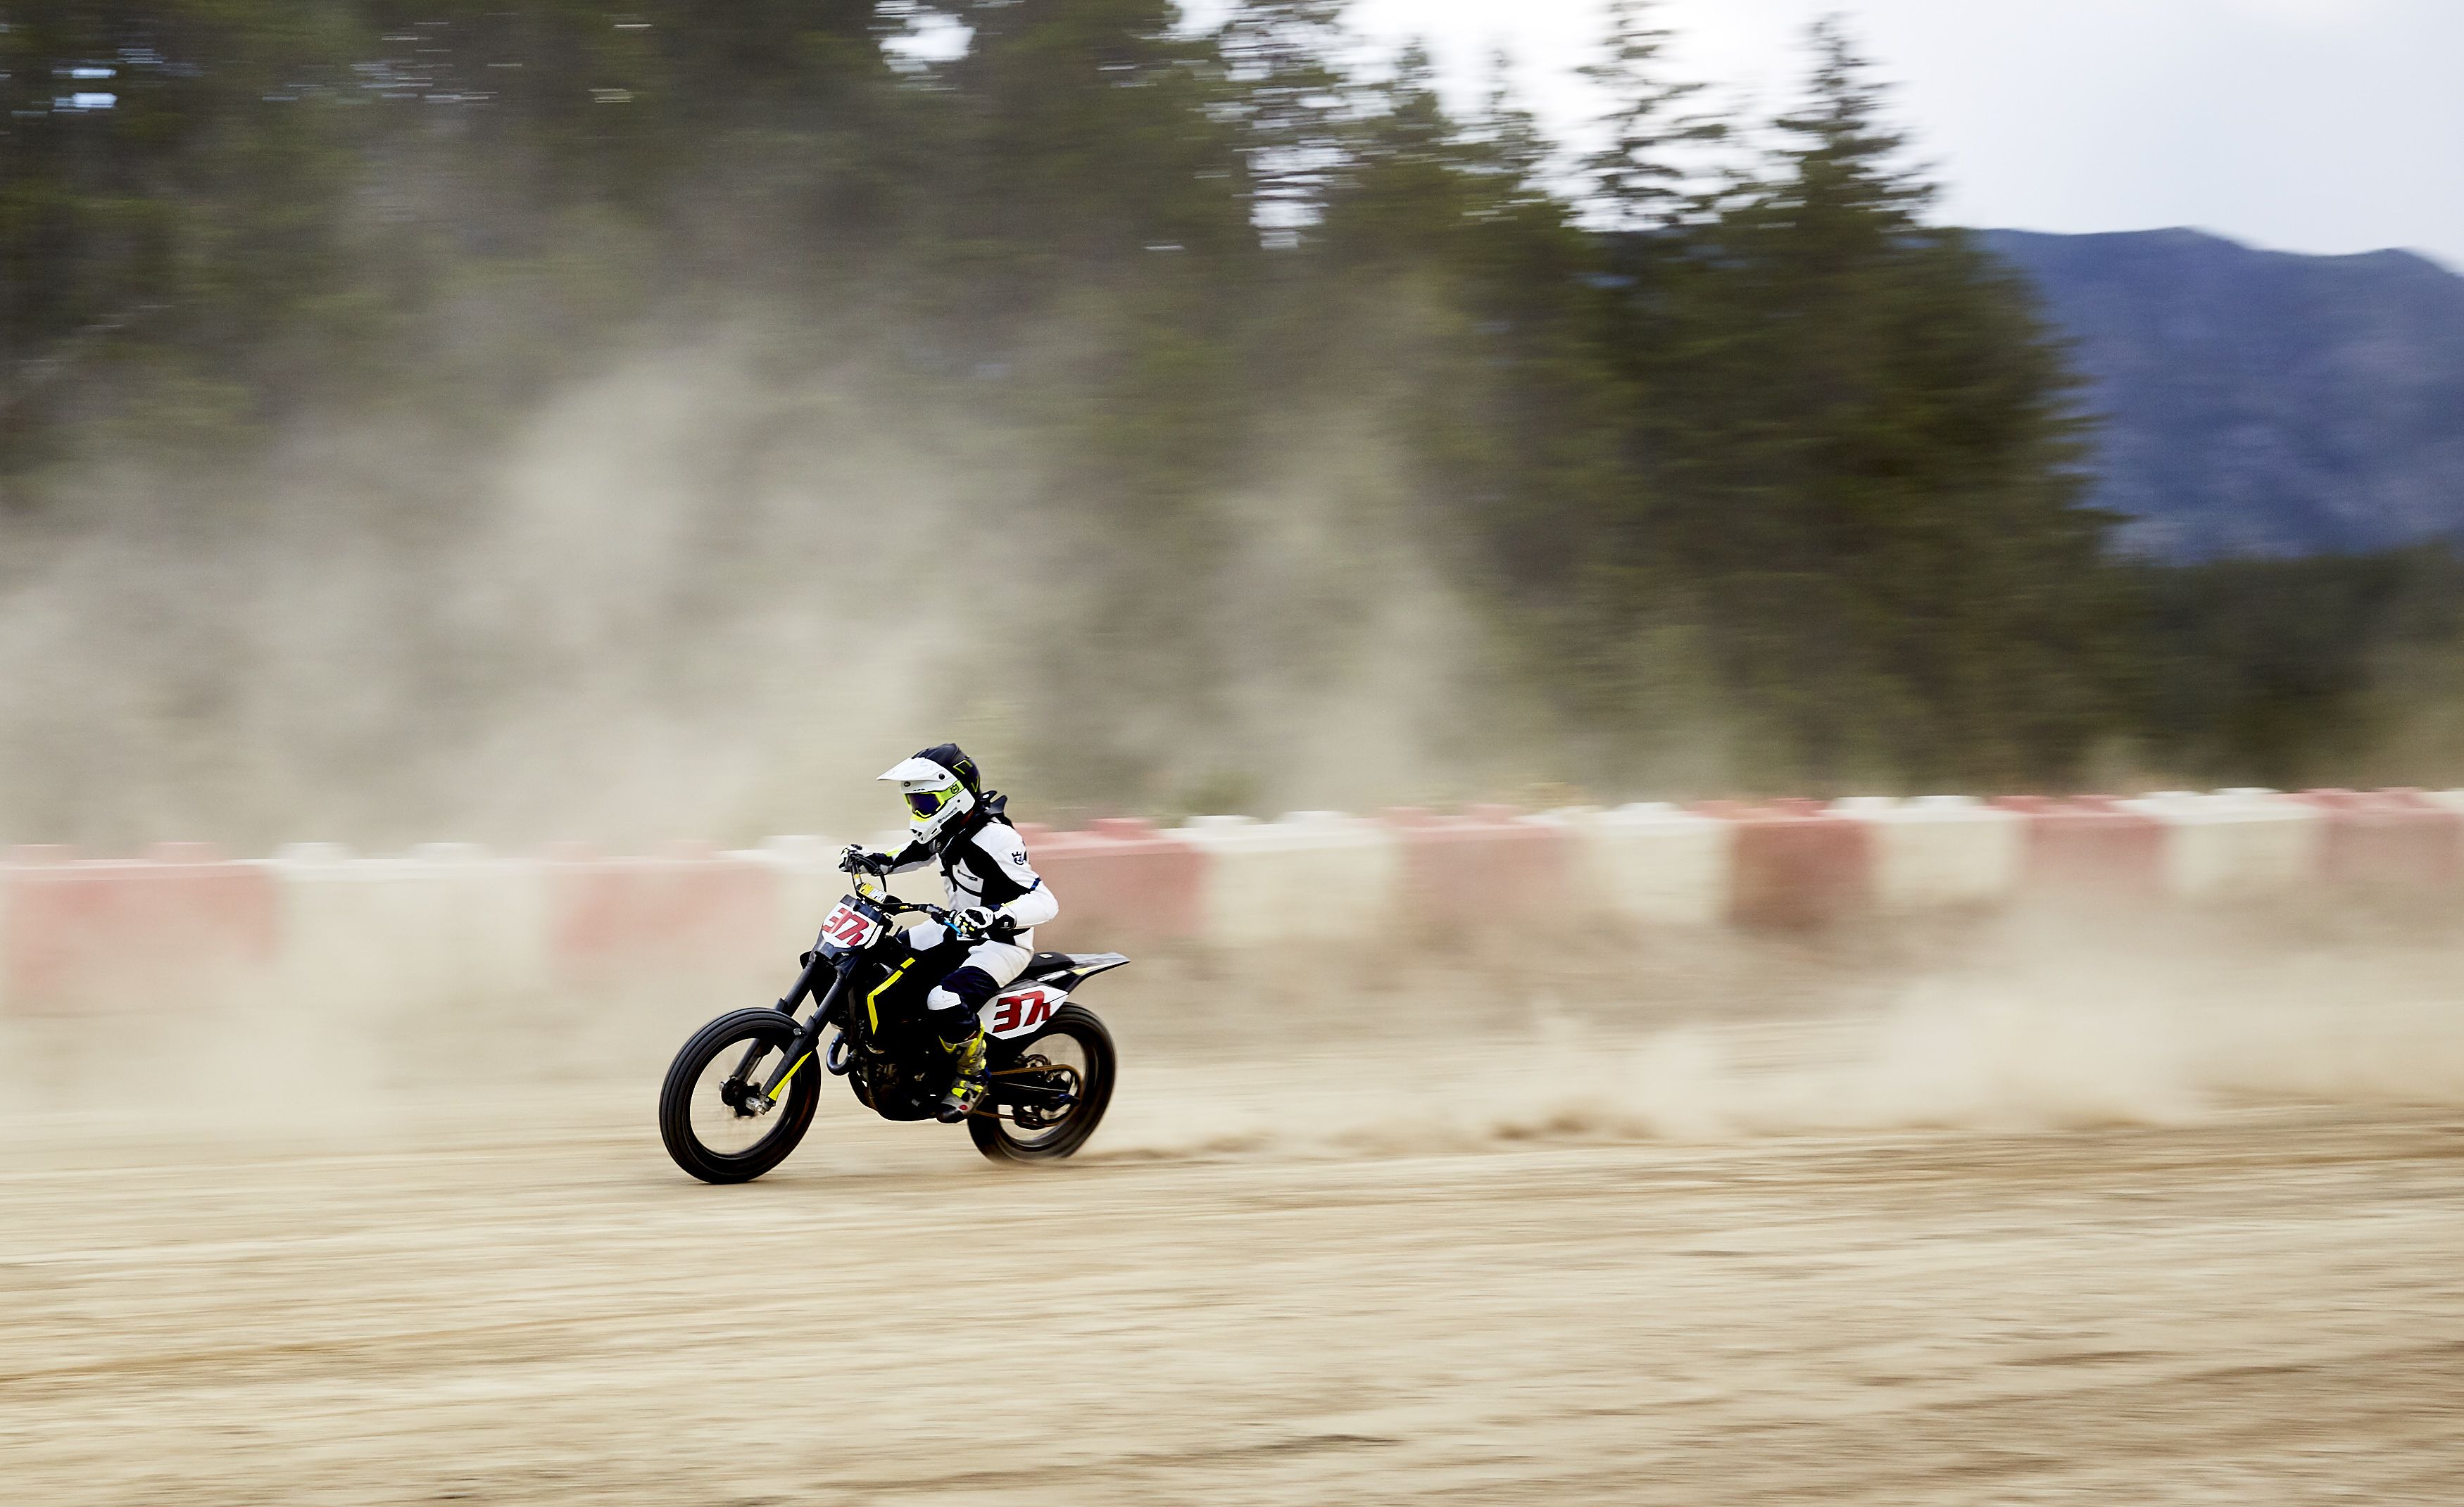 Nick Caldwell bombing down the straight on his Husqvarna FT350 during a practice lap.